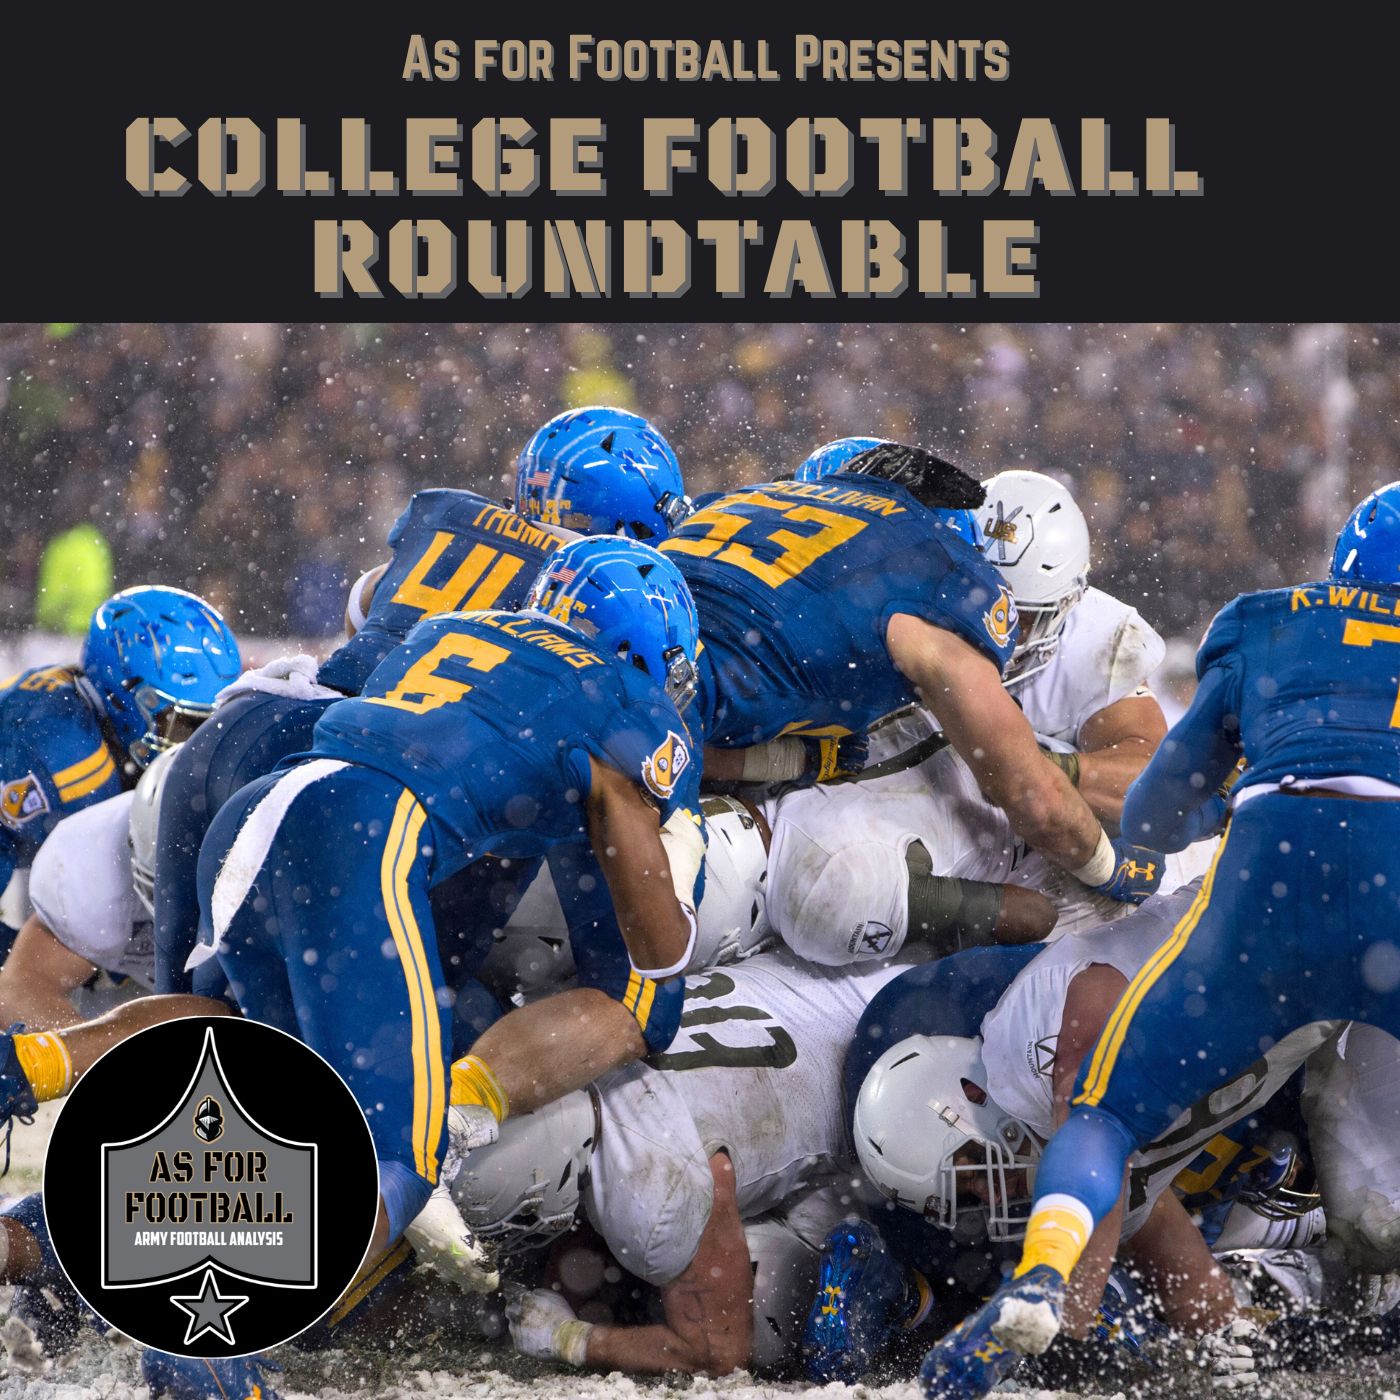 College Football Roundtable: May 13, 2021